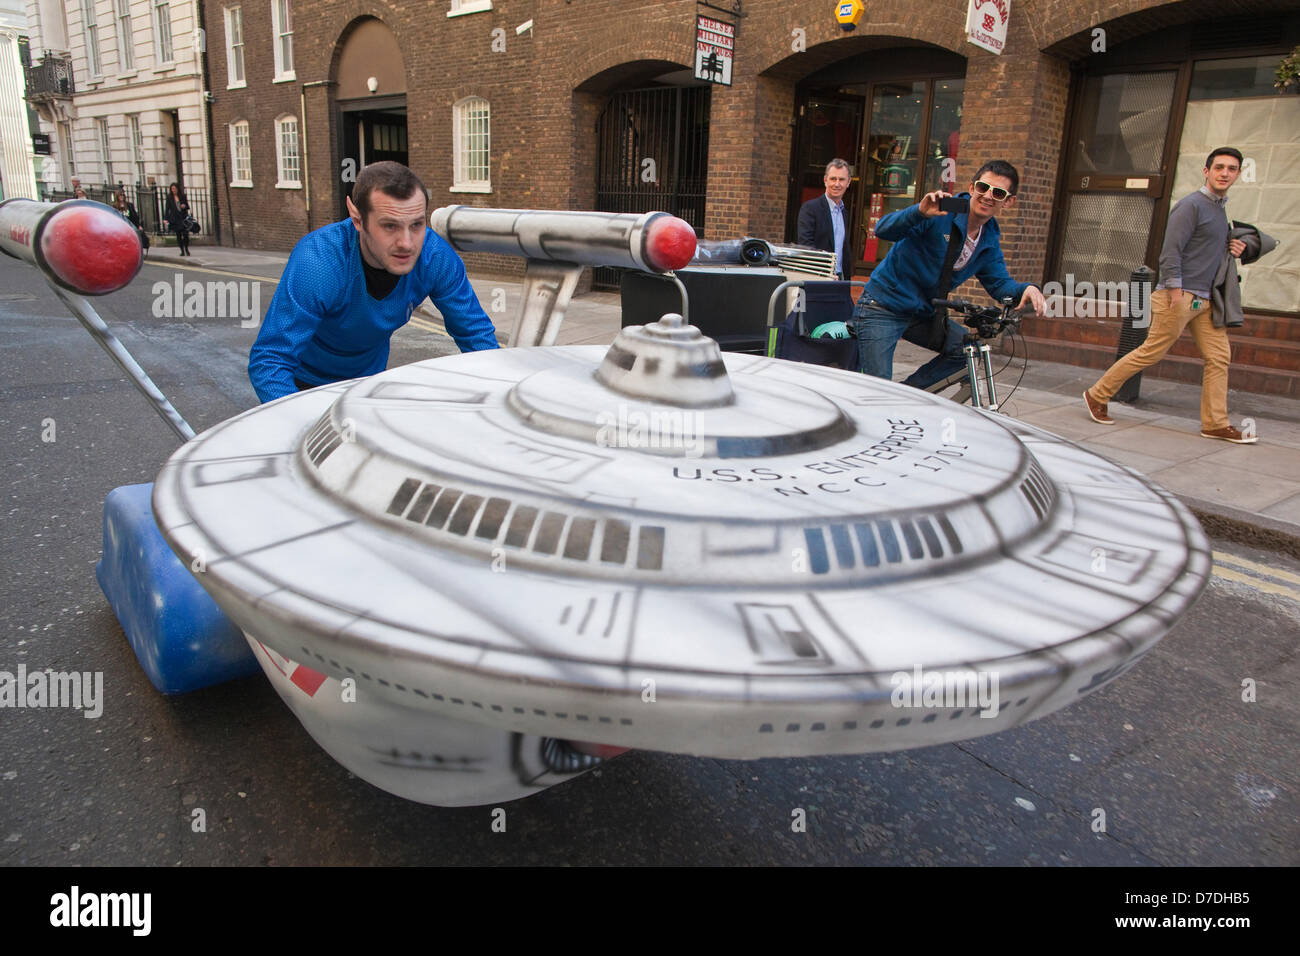 London, UK. 2nd May 2013.  Ultimate Trekkie fan Rob Wixey from Ealing, London, arrives at Star Trek Into The Darkness premiere with his homemade soapbox Starship which he will be racing at the Red Bull Soapbox race at Alexandra Palace on Sunday 14 July. © Westpix.co.uk / Alamy Live News Stock Photo